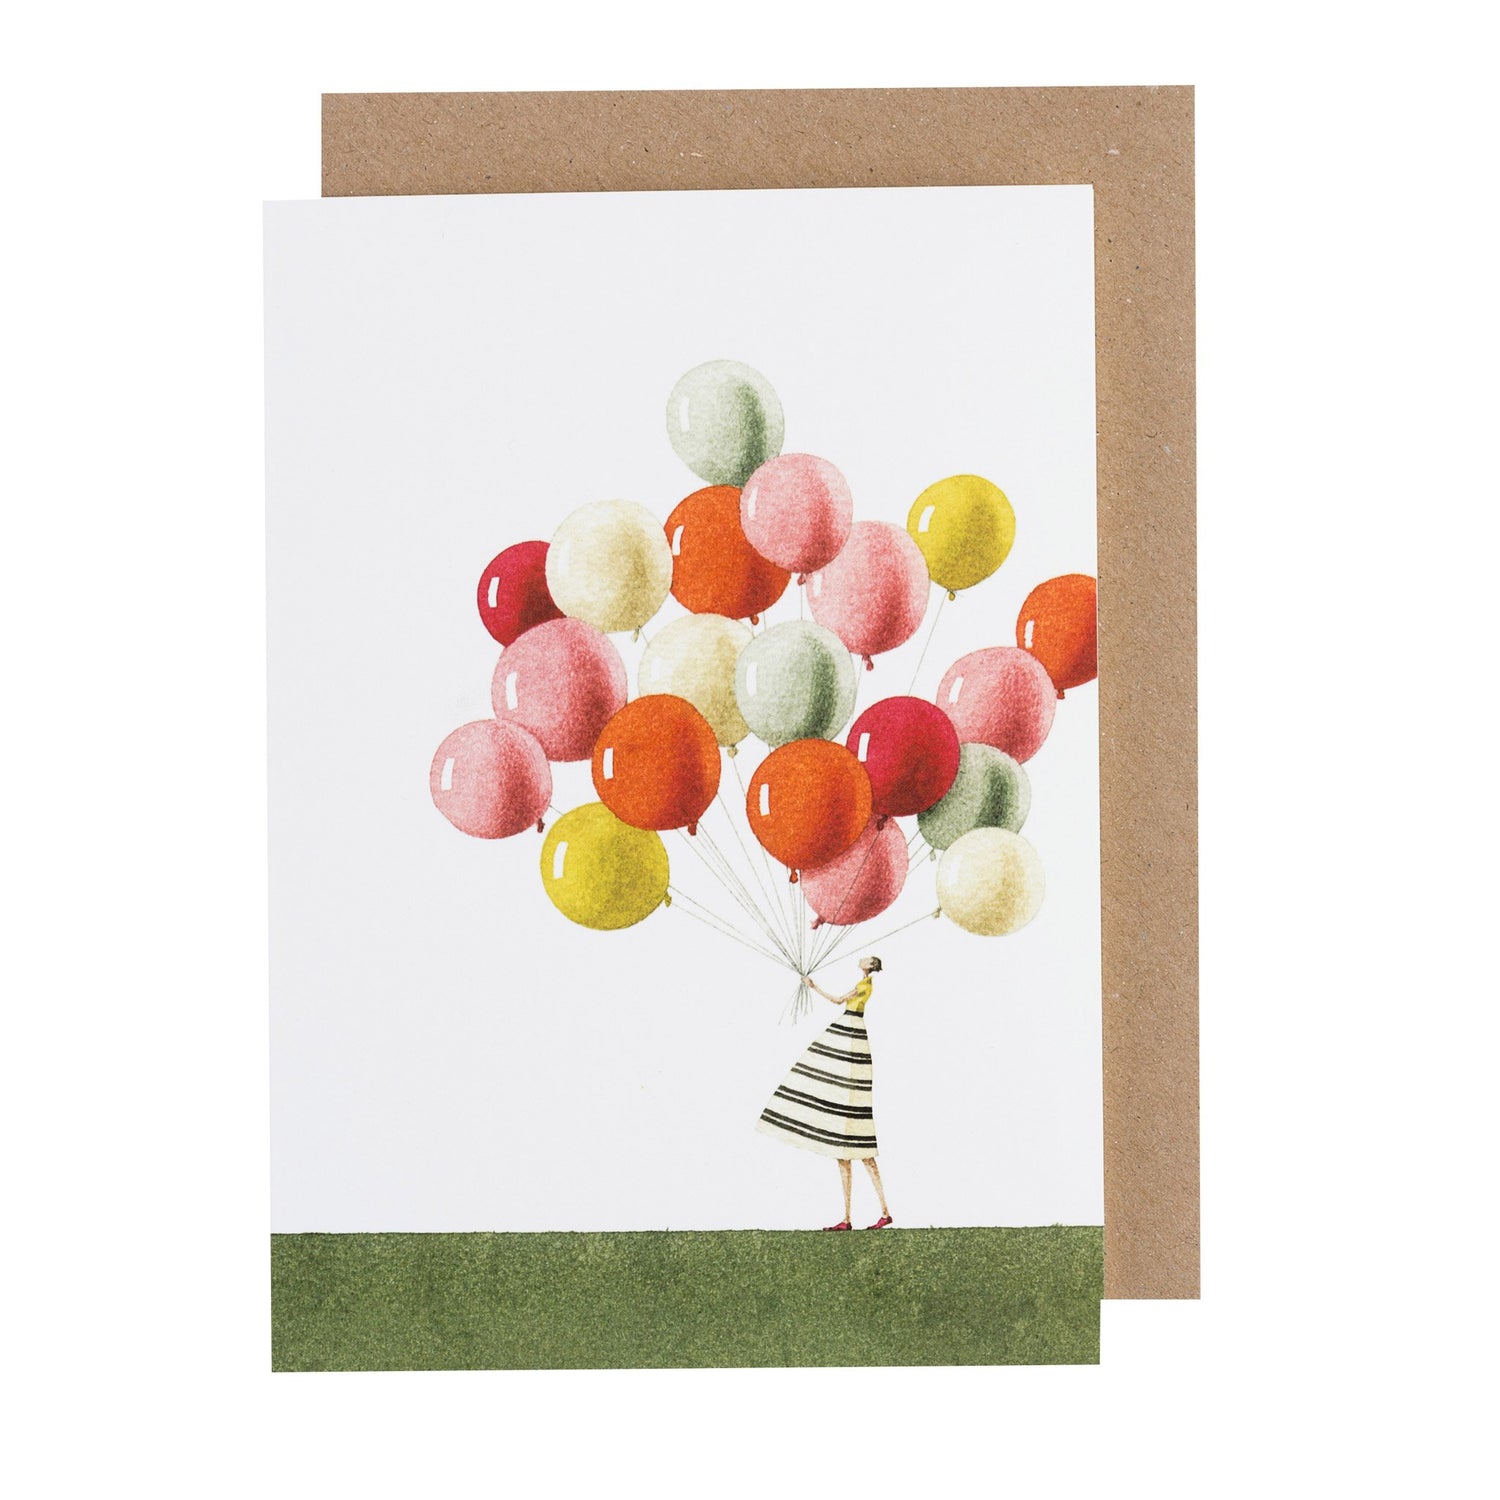 Illustration on an environmentally sustainable paper of a person holding a cluster of colorful Balloons Greeting Card by Hester &amp; Cook on a white background with a green strip representing the ground, perfect as a greetings card made in England.